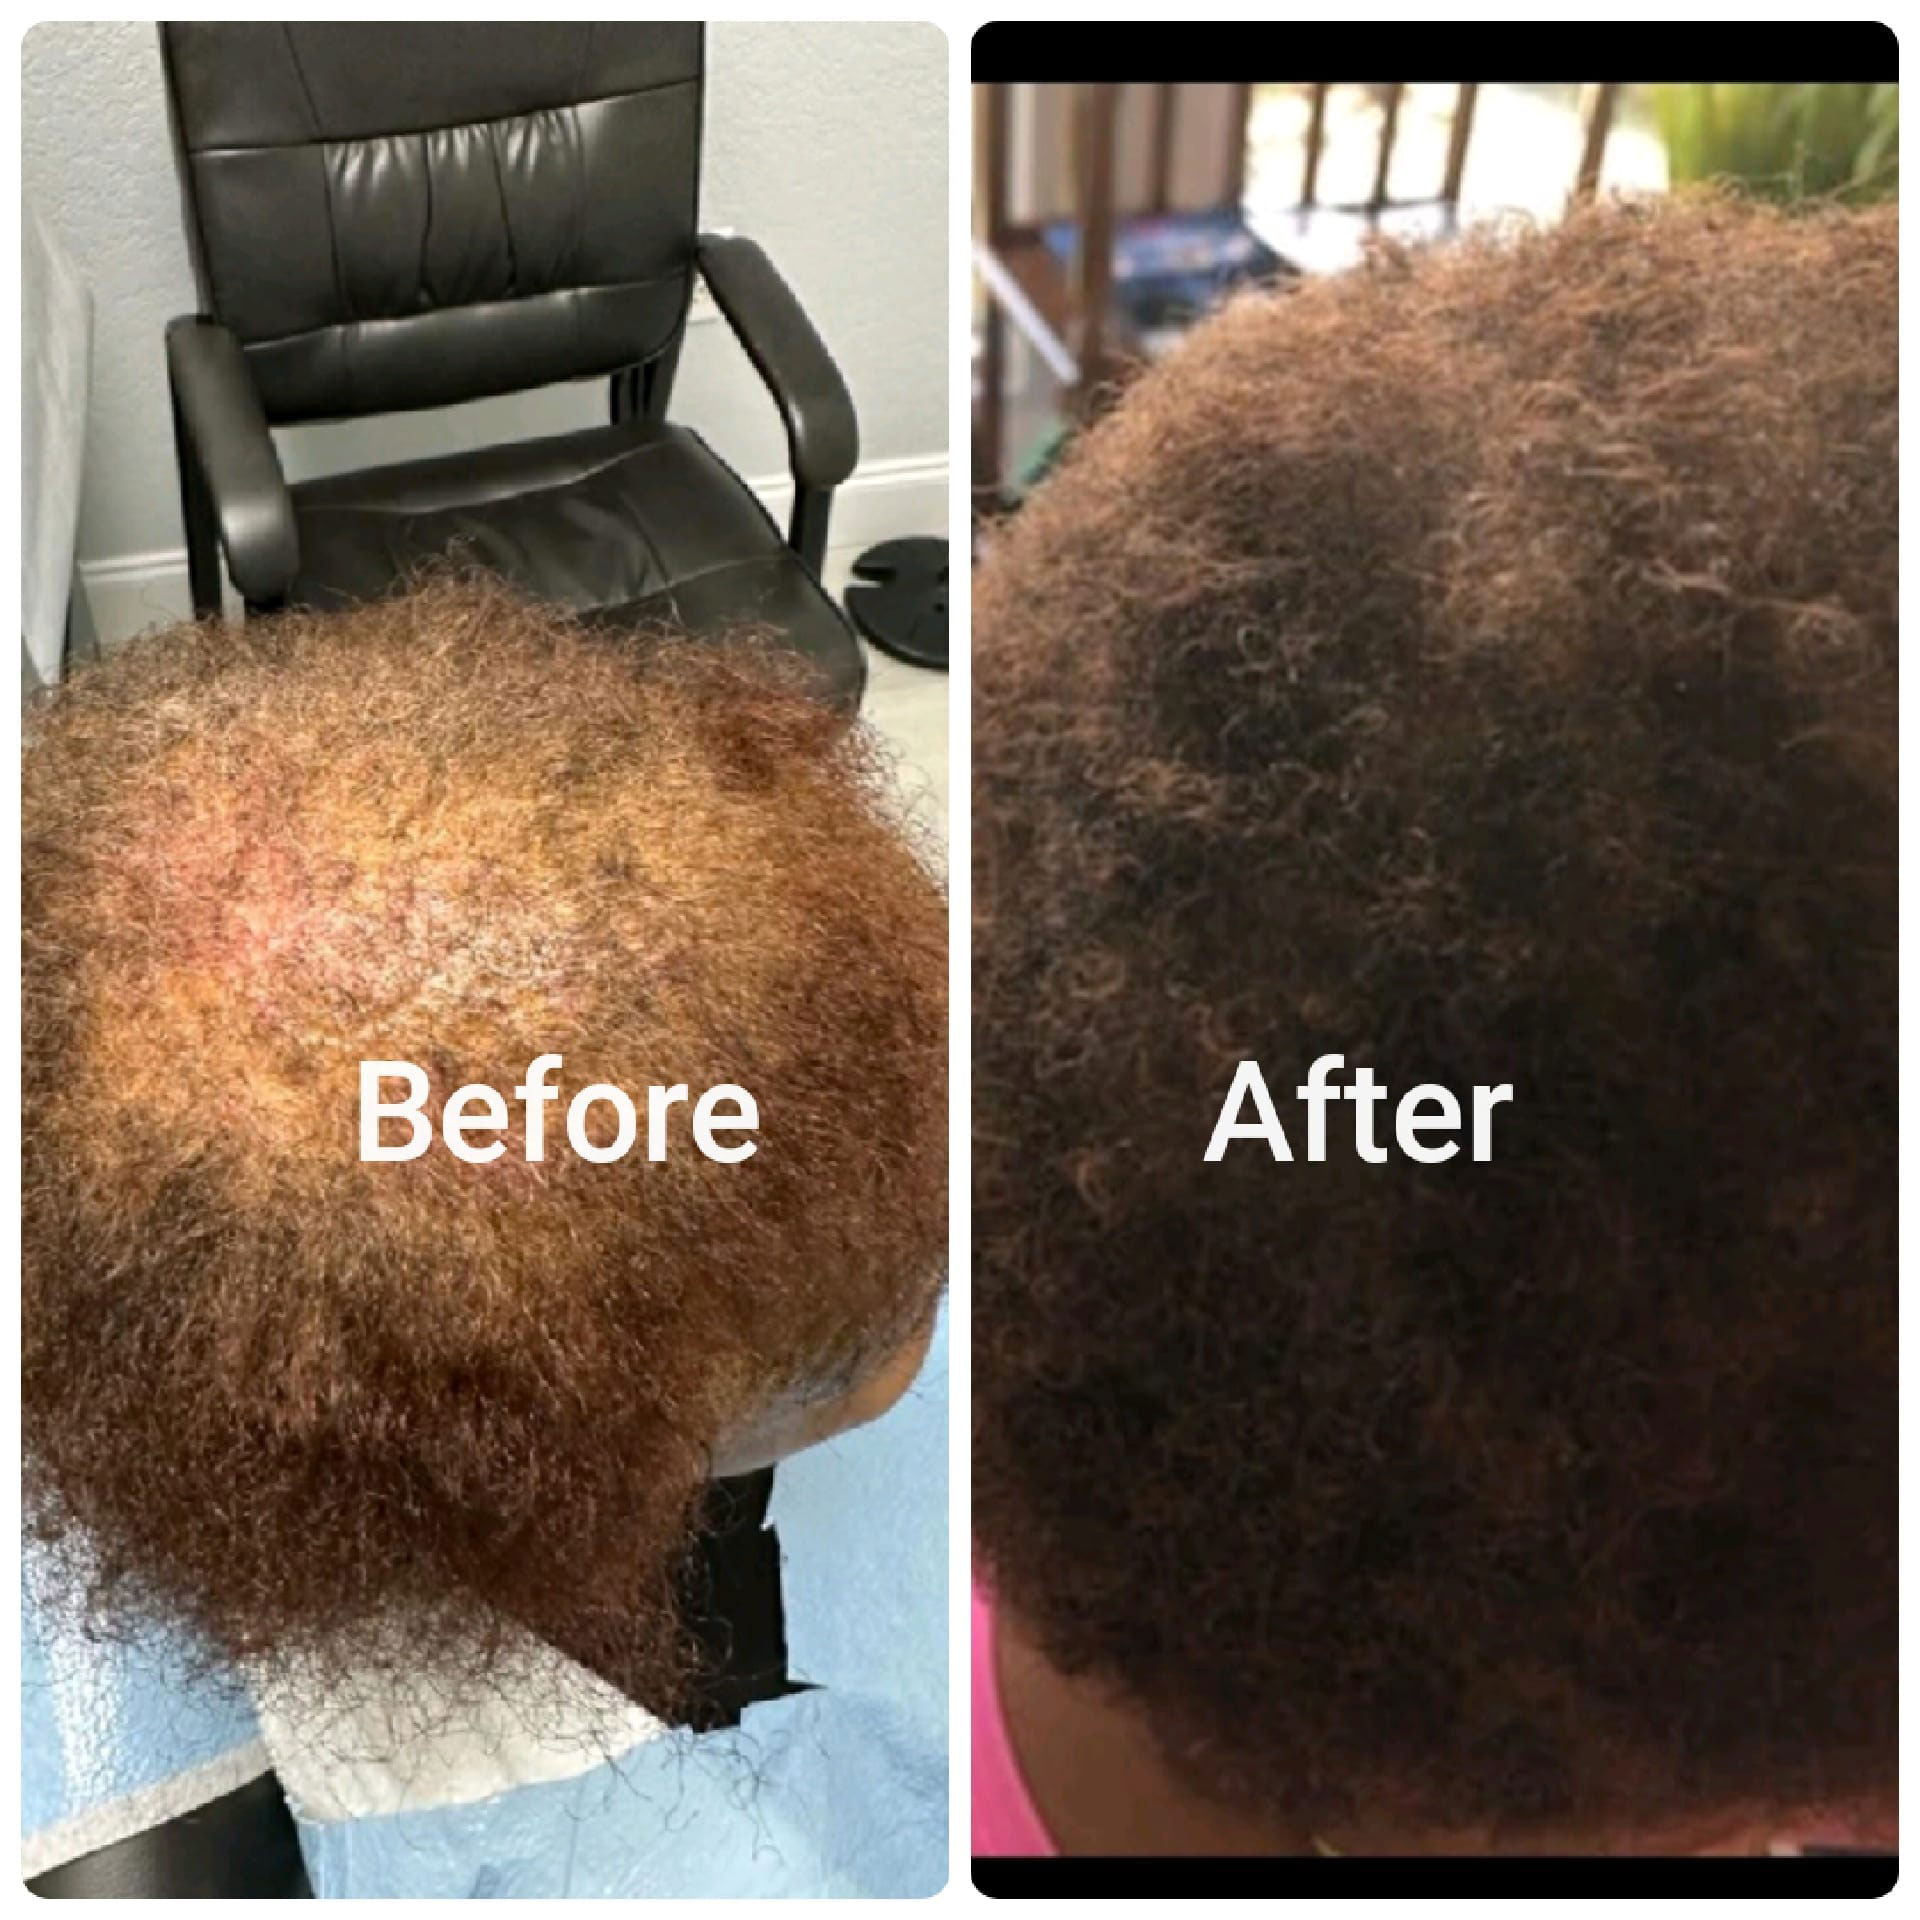 The image shows a before-and-after comparison of hair treatments, with the left side depicting a person s head with a full head of hair and the right side showing the same head after a hair treatment, with noticeable thinning.